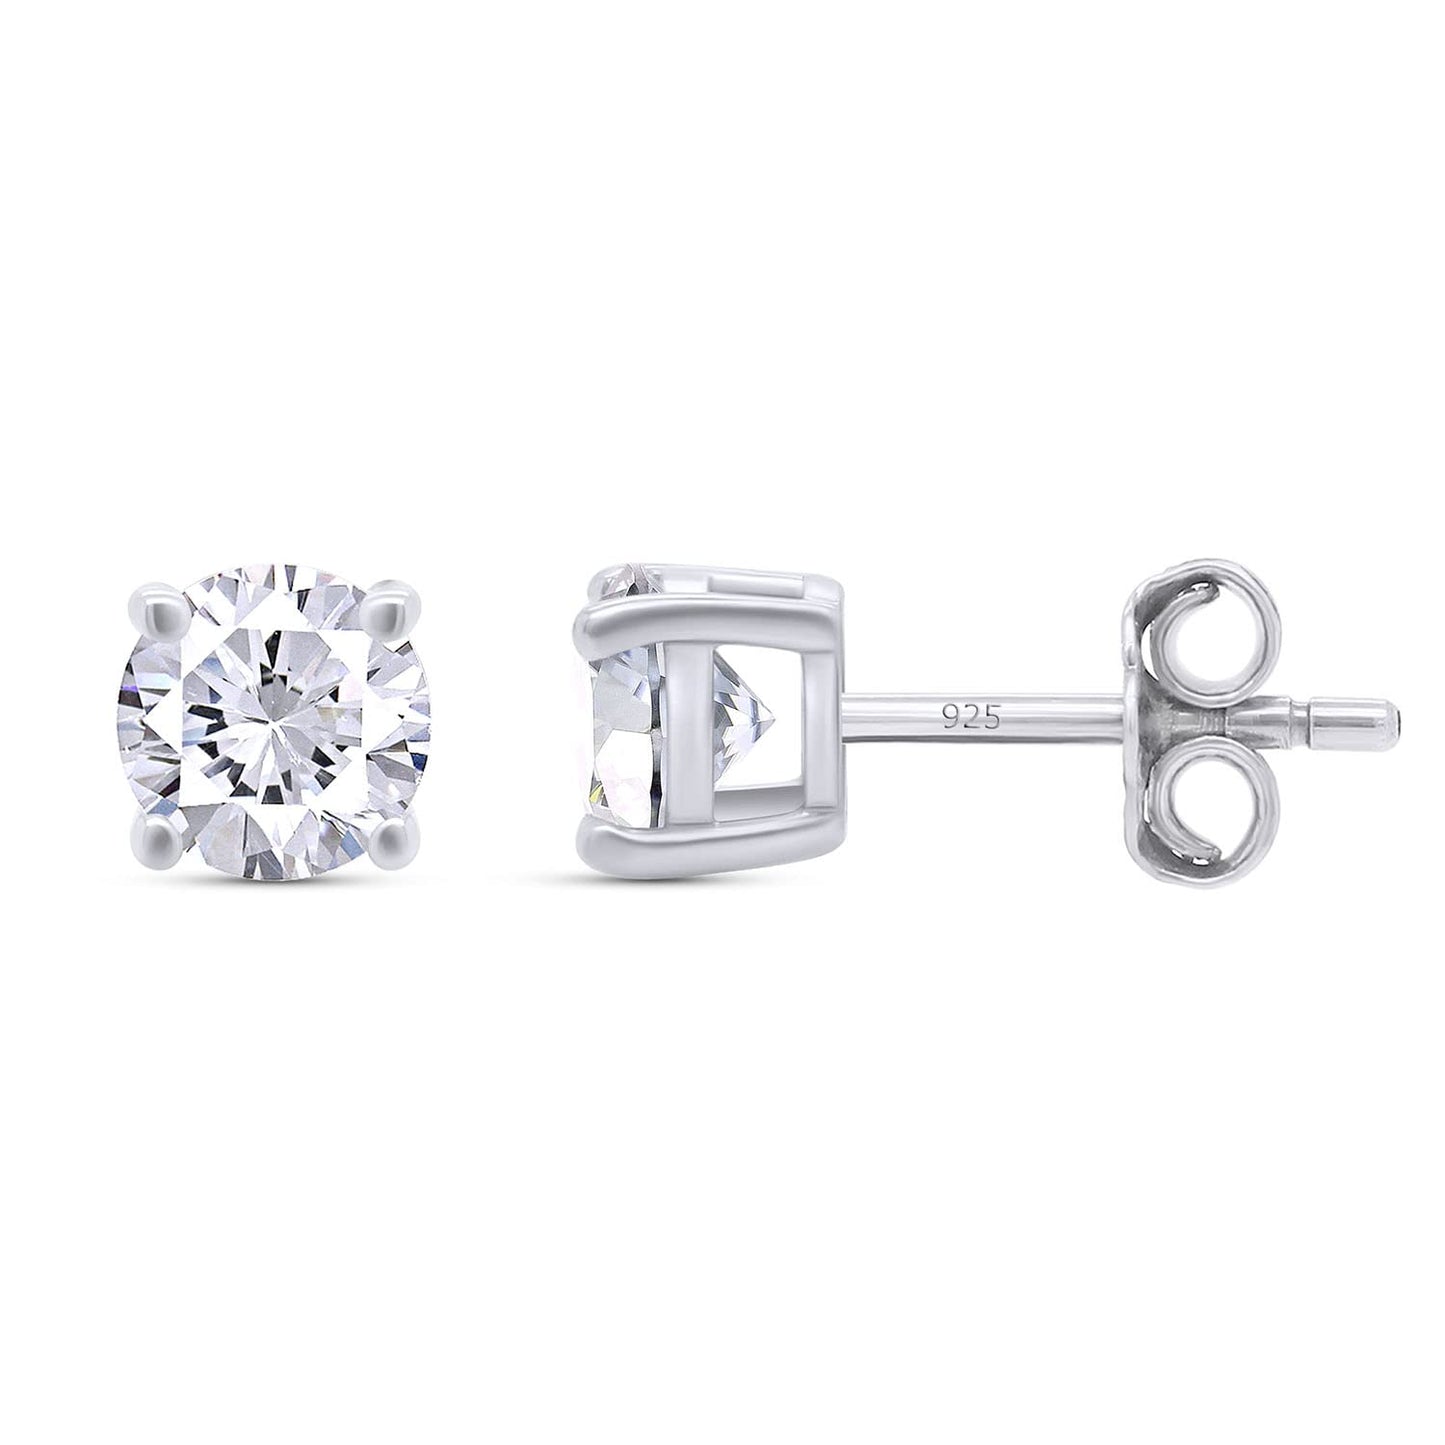 Load image into Gallery viewer, 1 to 3 Carat Round Cut Lab Created Moissanite Diamond Push Back Stud Earrings In 925 Sterling Silver (1 To 3 Cttw)
